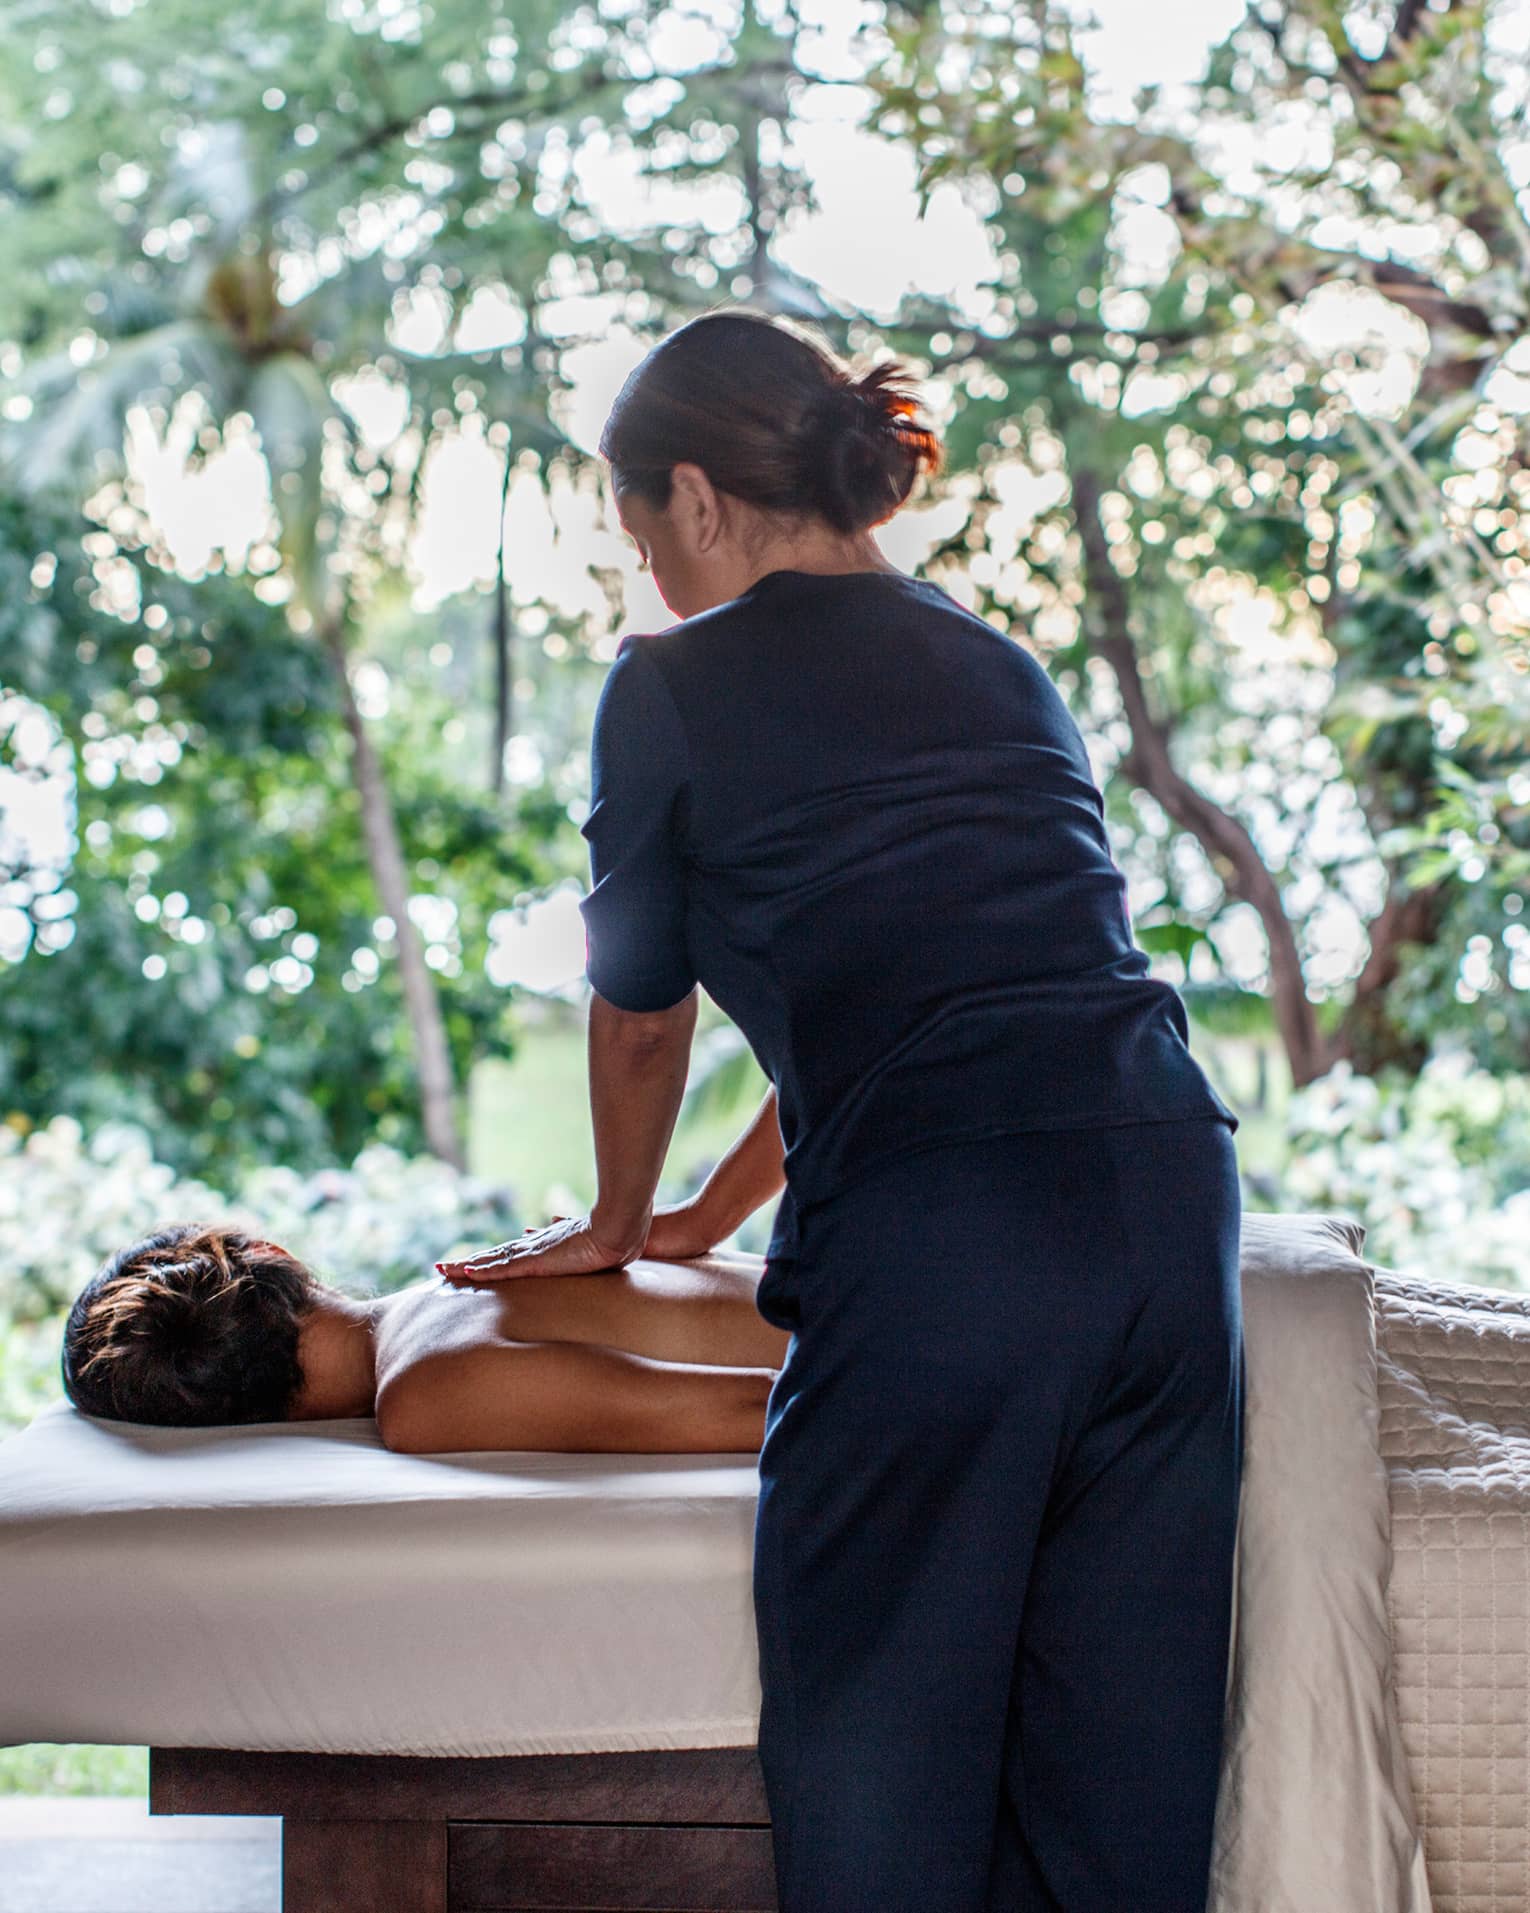 Spa staff massages woman's bare shoulders as she lies under sheet on massage table